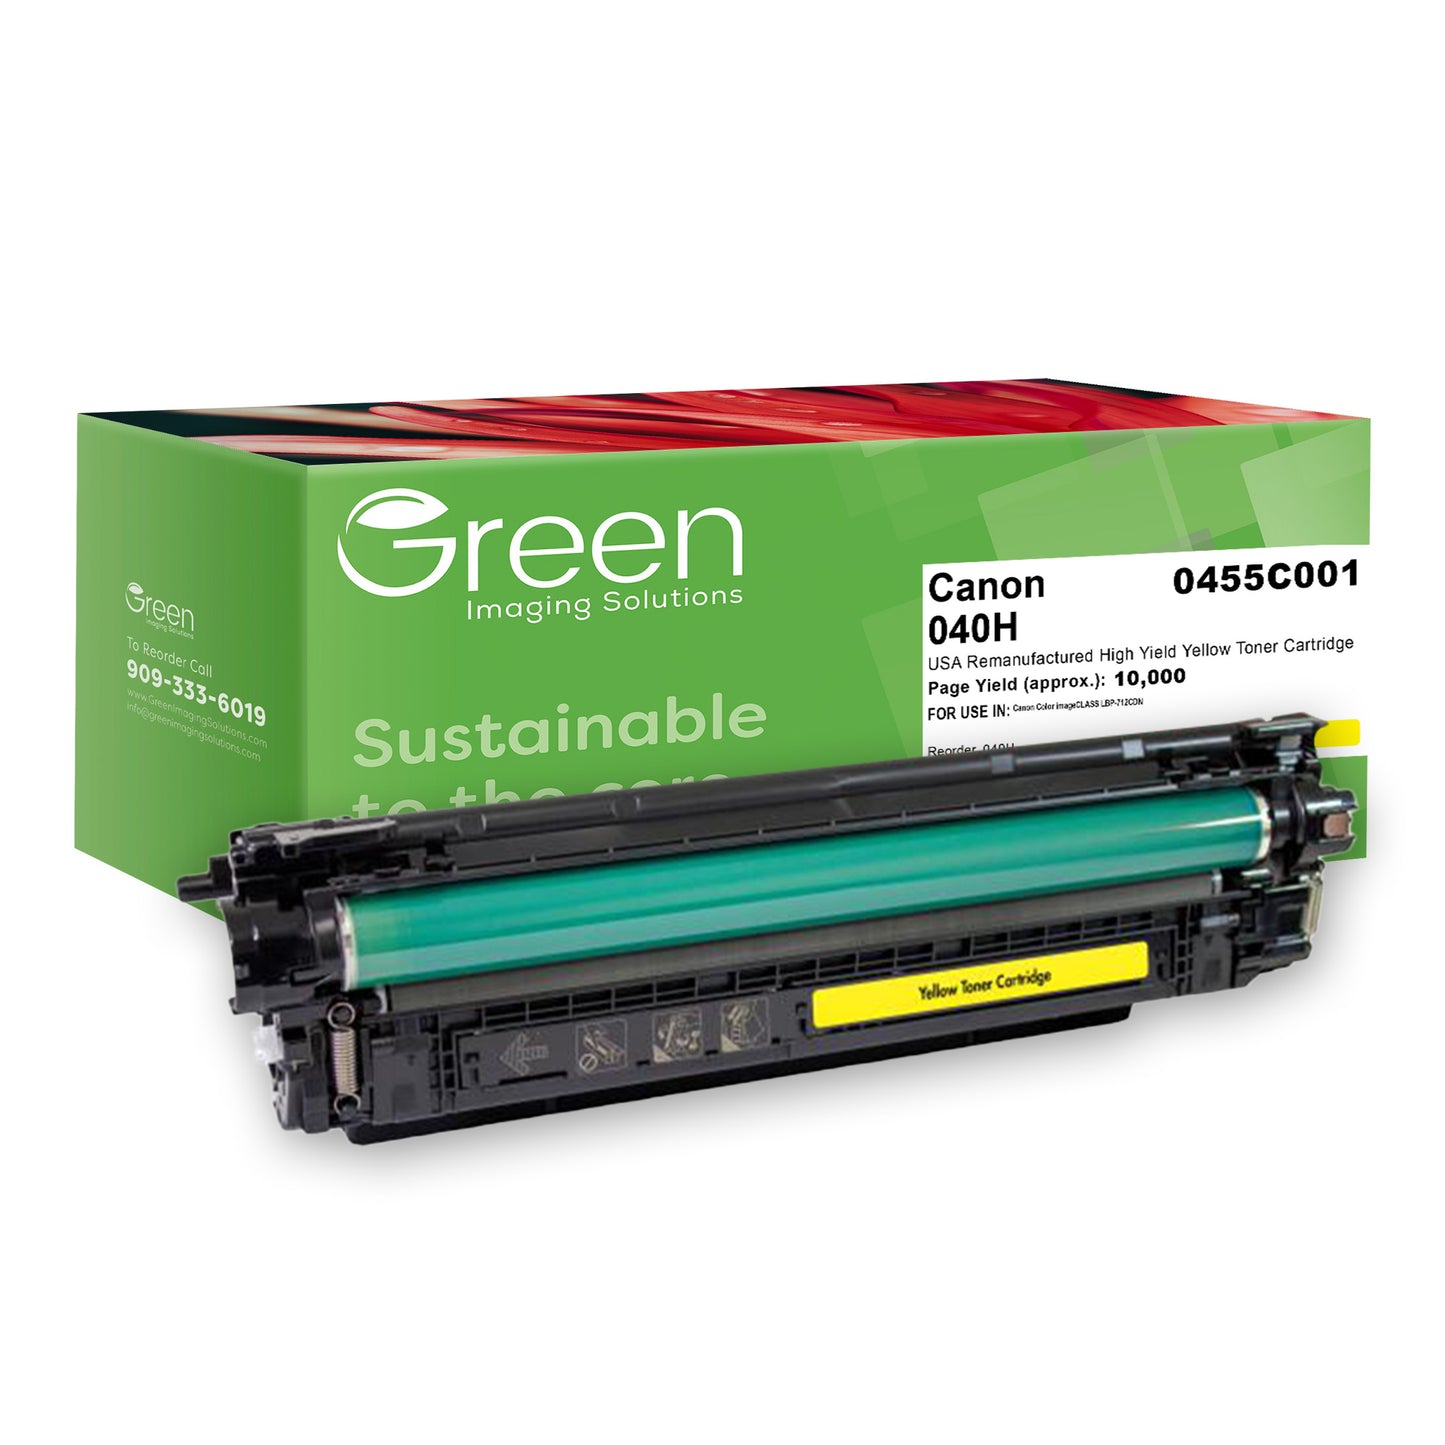 Green Imaging Solutions USA Remanufactured High Yield Yellow Toner Cartridge for Canon 0455C001 (040 H)